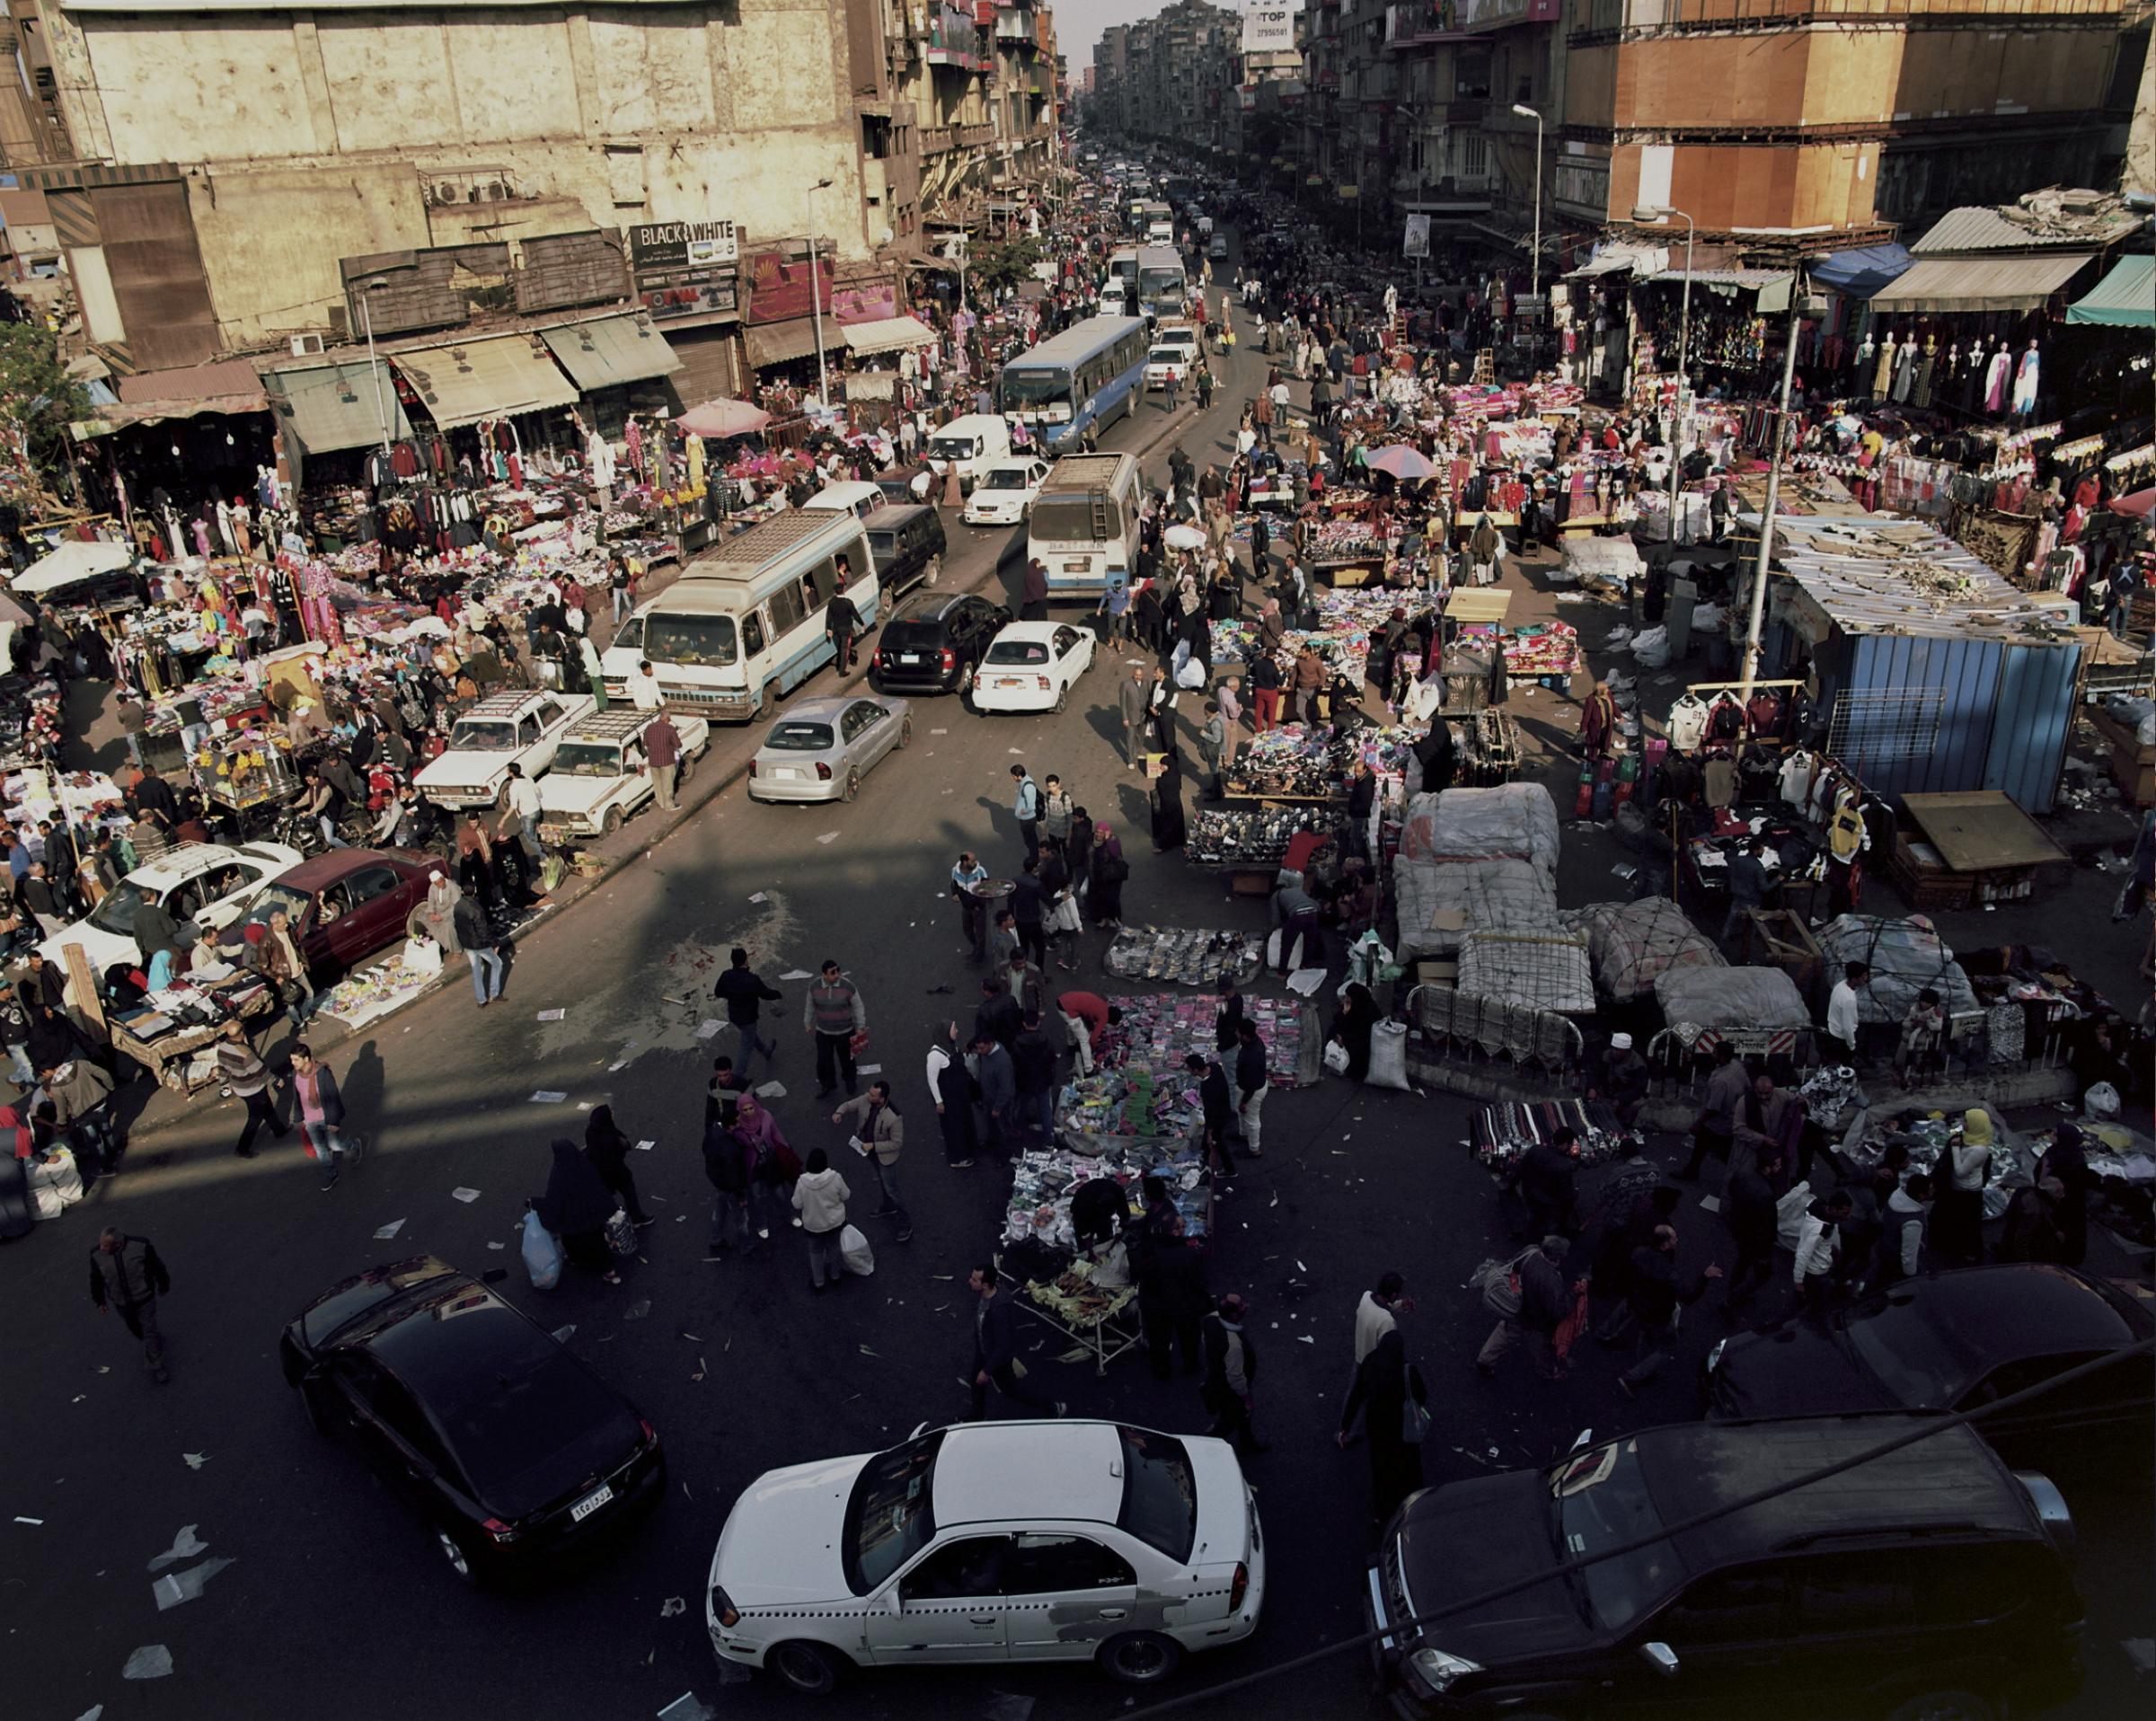  A market in Cairo, Egypt. A silent epidemic is rising on the surface as people who are living with HIV in Egypt are still convicted, condemned, denounced, and punished by society till the day they die without having committed a crime. The rise of HIV is not homogeneous. Numbers are still estimated statistically at 11,000 people living with HIV by the UNAIDS and 7,000 people by the ministry of health. However, there is a definite increase in numbers of new infections because of less funds and investments in prevention, &quot;most recently we&#39;ve been seeing people at a much younger age group infected with the virus. We are seeing teenagers who have bad complications which means they&#39;ve been infected for a few years. There is a higher risk on adolescence and youth in Egypt more than the past according to new confirmed cases. This is not an unconfirmed statistic unfortunately but this evidence we are seeing on the ground,&quot; Ahmed Khamis, country manager of UNIAIDS in Egypt said. Jan. 3, 2018 